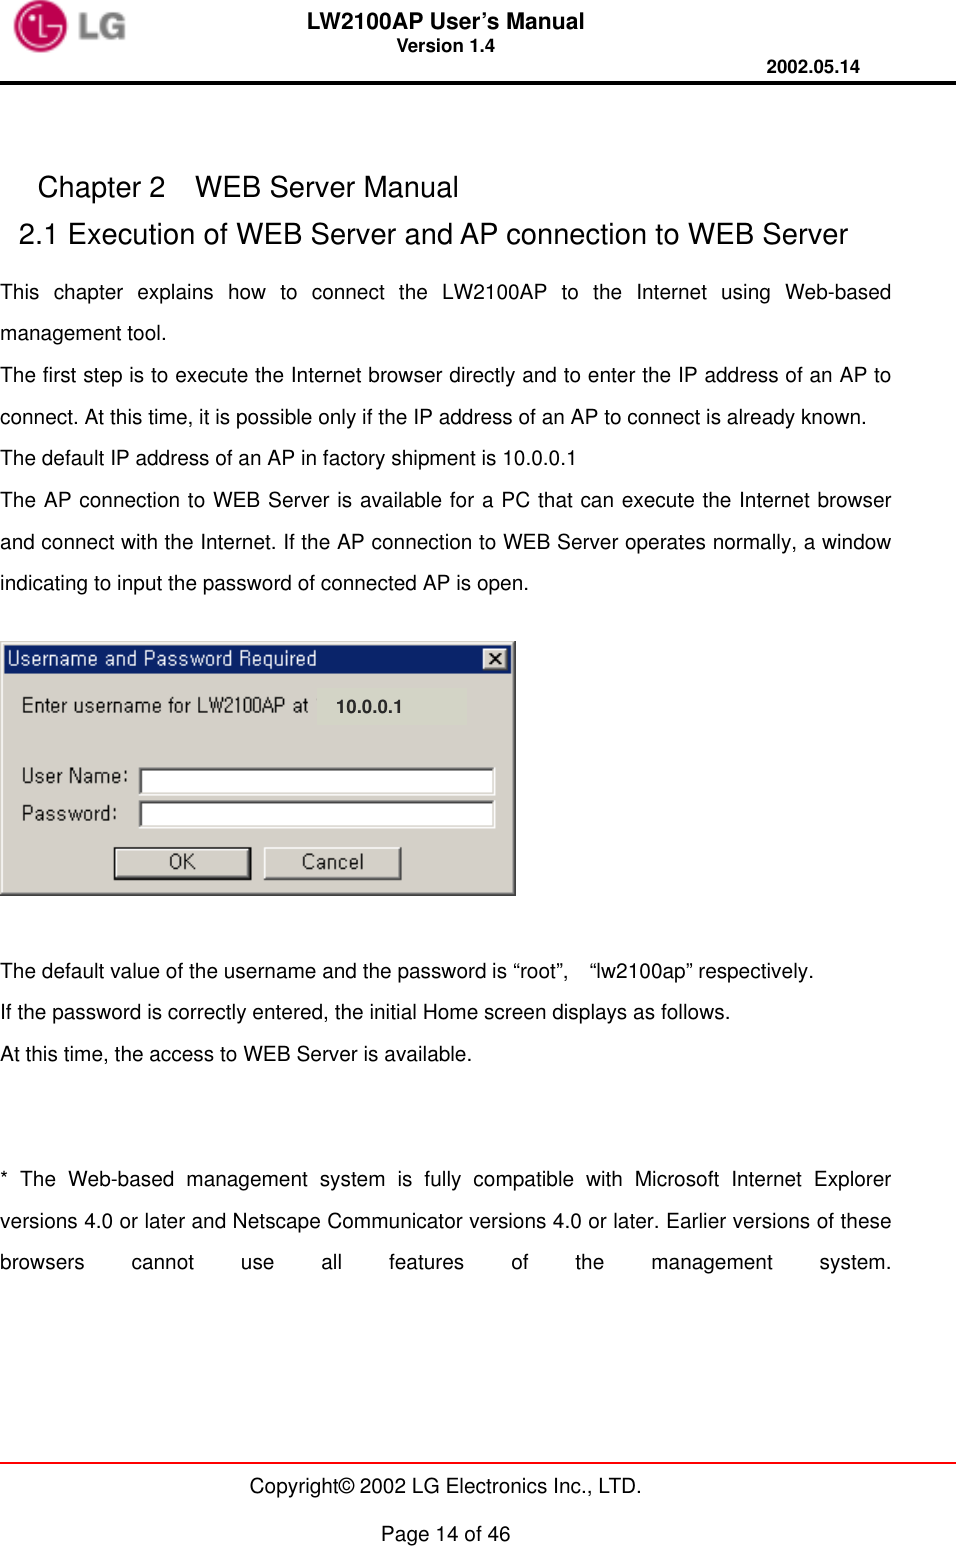 LW2100AP User’s Manual Version 1.4 2002.05.14   Copyright© 2002 LG Electronics Inc., LTD.  Page 14 of 46   Chapter 2  WEB Server Manual 2.1 Execution of WEB Server and AP connection to WEB Server This chapter explains how to connect the LW2100AP to the Internet using Web-based management tool. The first step is to execute the Internet browser directly and to enter the IP address of an AP to connect. At this time, it is possible only if the IP address of an AP to connect is already known. The default IP address of an AP in factory shipment is 10.0.0.1 The AP connection to WEB Server is available for a PC that can execute the Internet browser and connect with the Internet. If the AP connection to WEB Server operates normally, a window indicating to input the password of connected AP is open.      The default value of the username and the password is “root”,  “lw2100ap” respectively. If the password is correctly entered, the initial Home screen displays as follows. At this time, the access to WEB Server is available.   * The Web-based management system is fully compatible with Microsoft Internet Explorer versions 4.0 or later and Netscape Communicator versions 4.0 or later. Earlier versions of these browsers cannot use all features of the management system. 10.0.0.1 